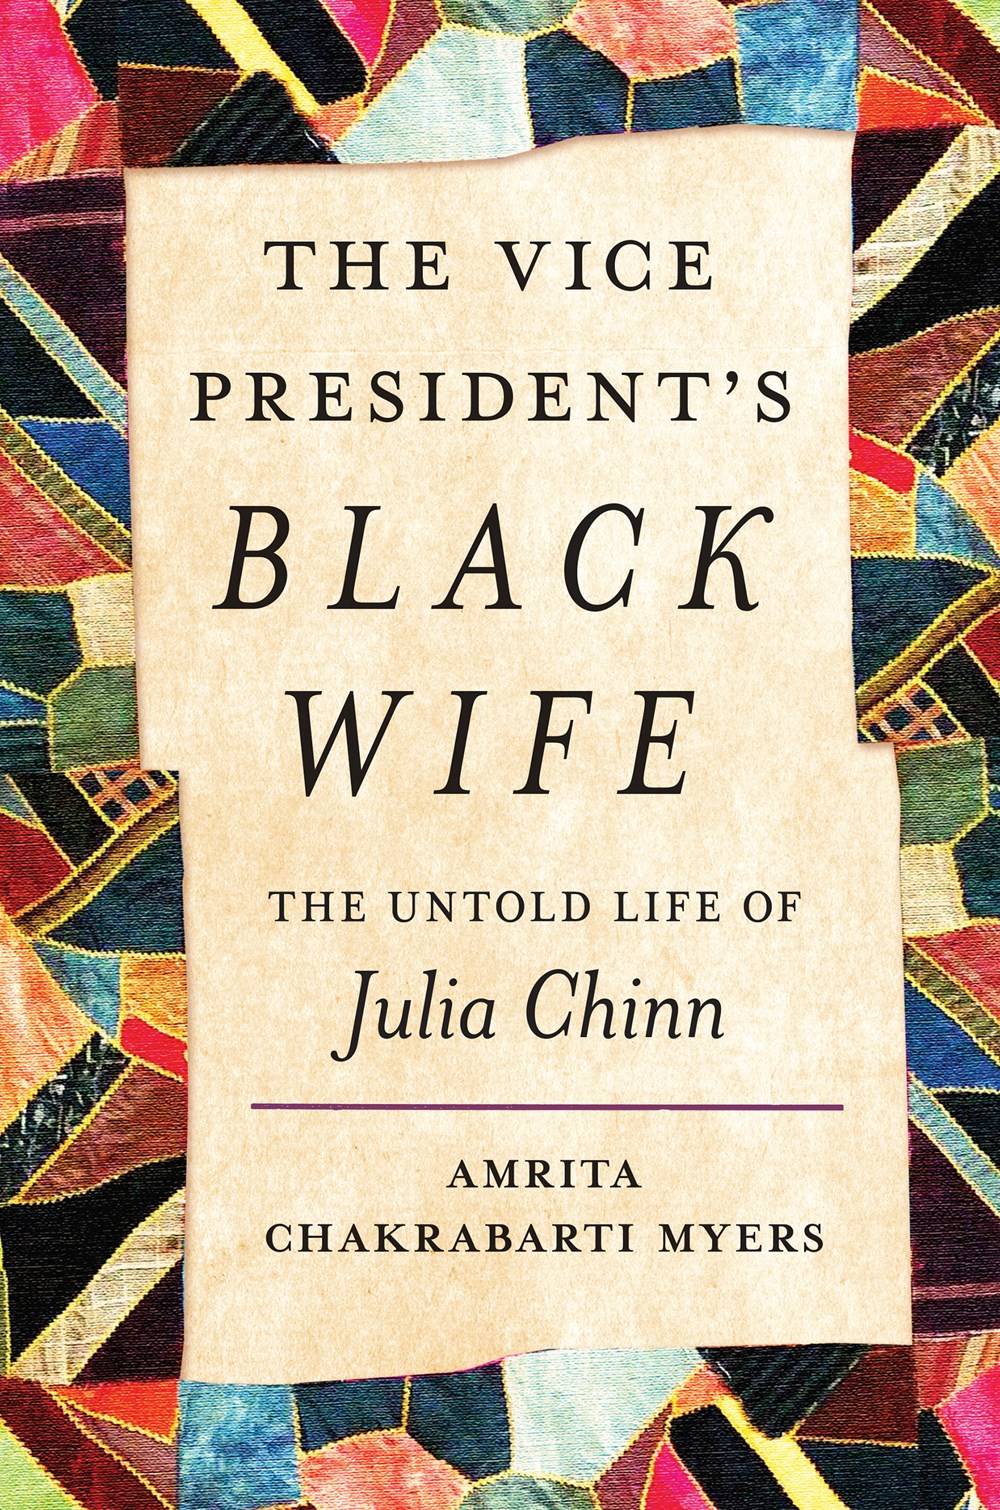 The Vice President’s Black Wife: The Untold Life of Julia Chinn